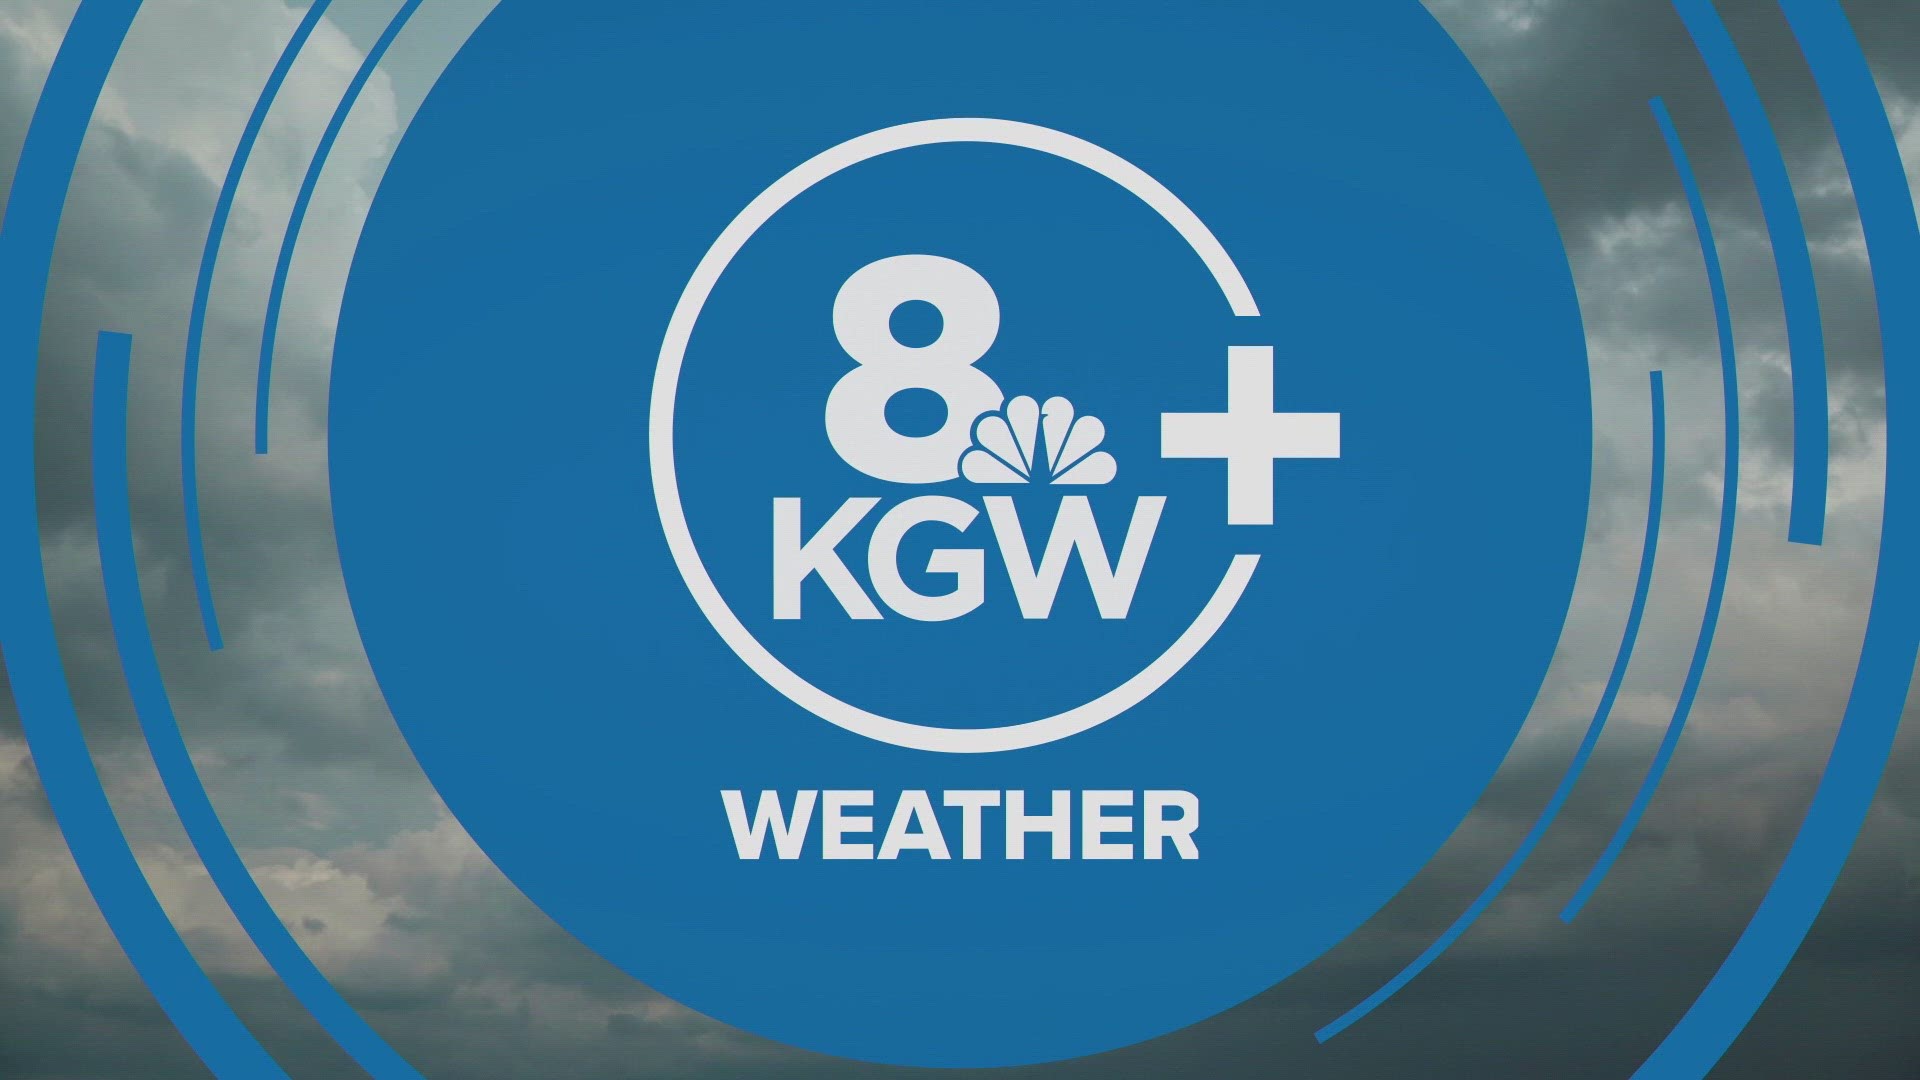 KGW meteorologist has the KGW+ Weather report for Portland, Oregon and surrounding areas for Tuesday, March 21, 2023.